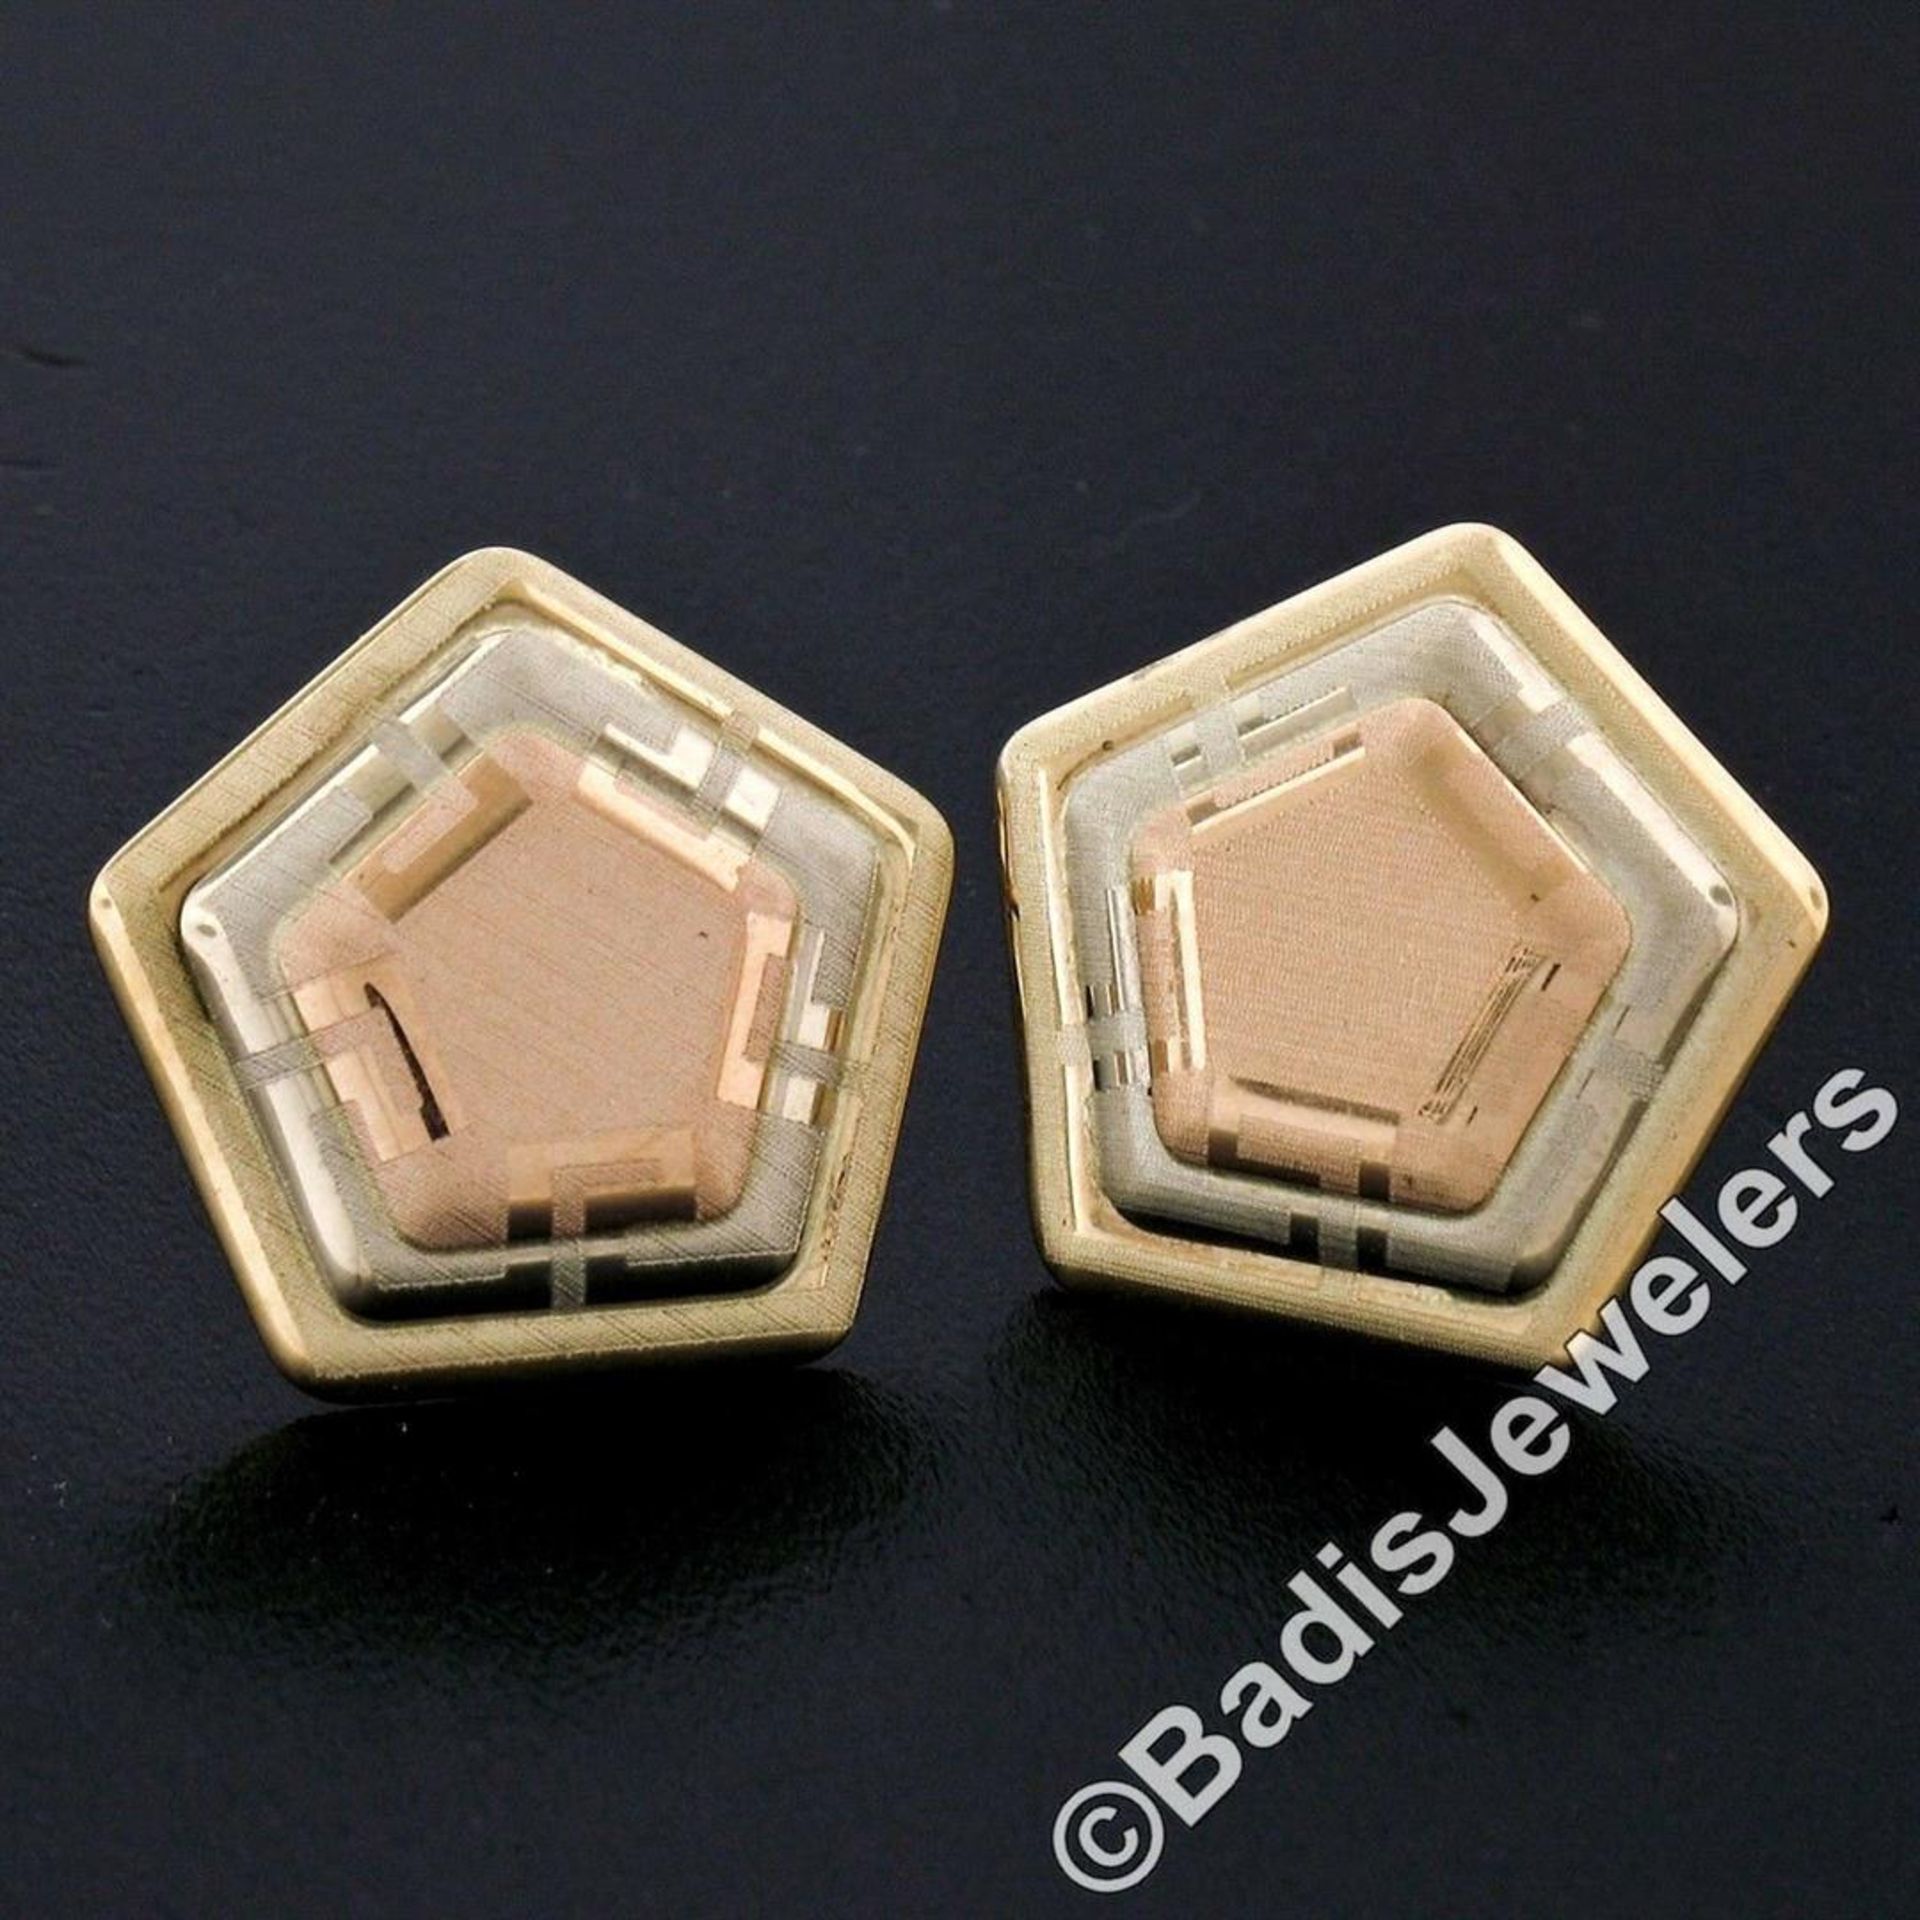 New 14kt Rose, White, and Yellow Gold Stone Finished Tiered Pentagon Stud Earrin - Image 2 of 6